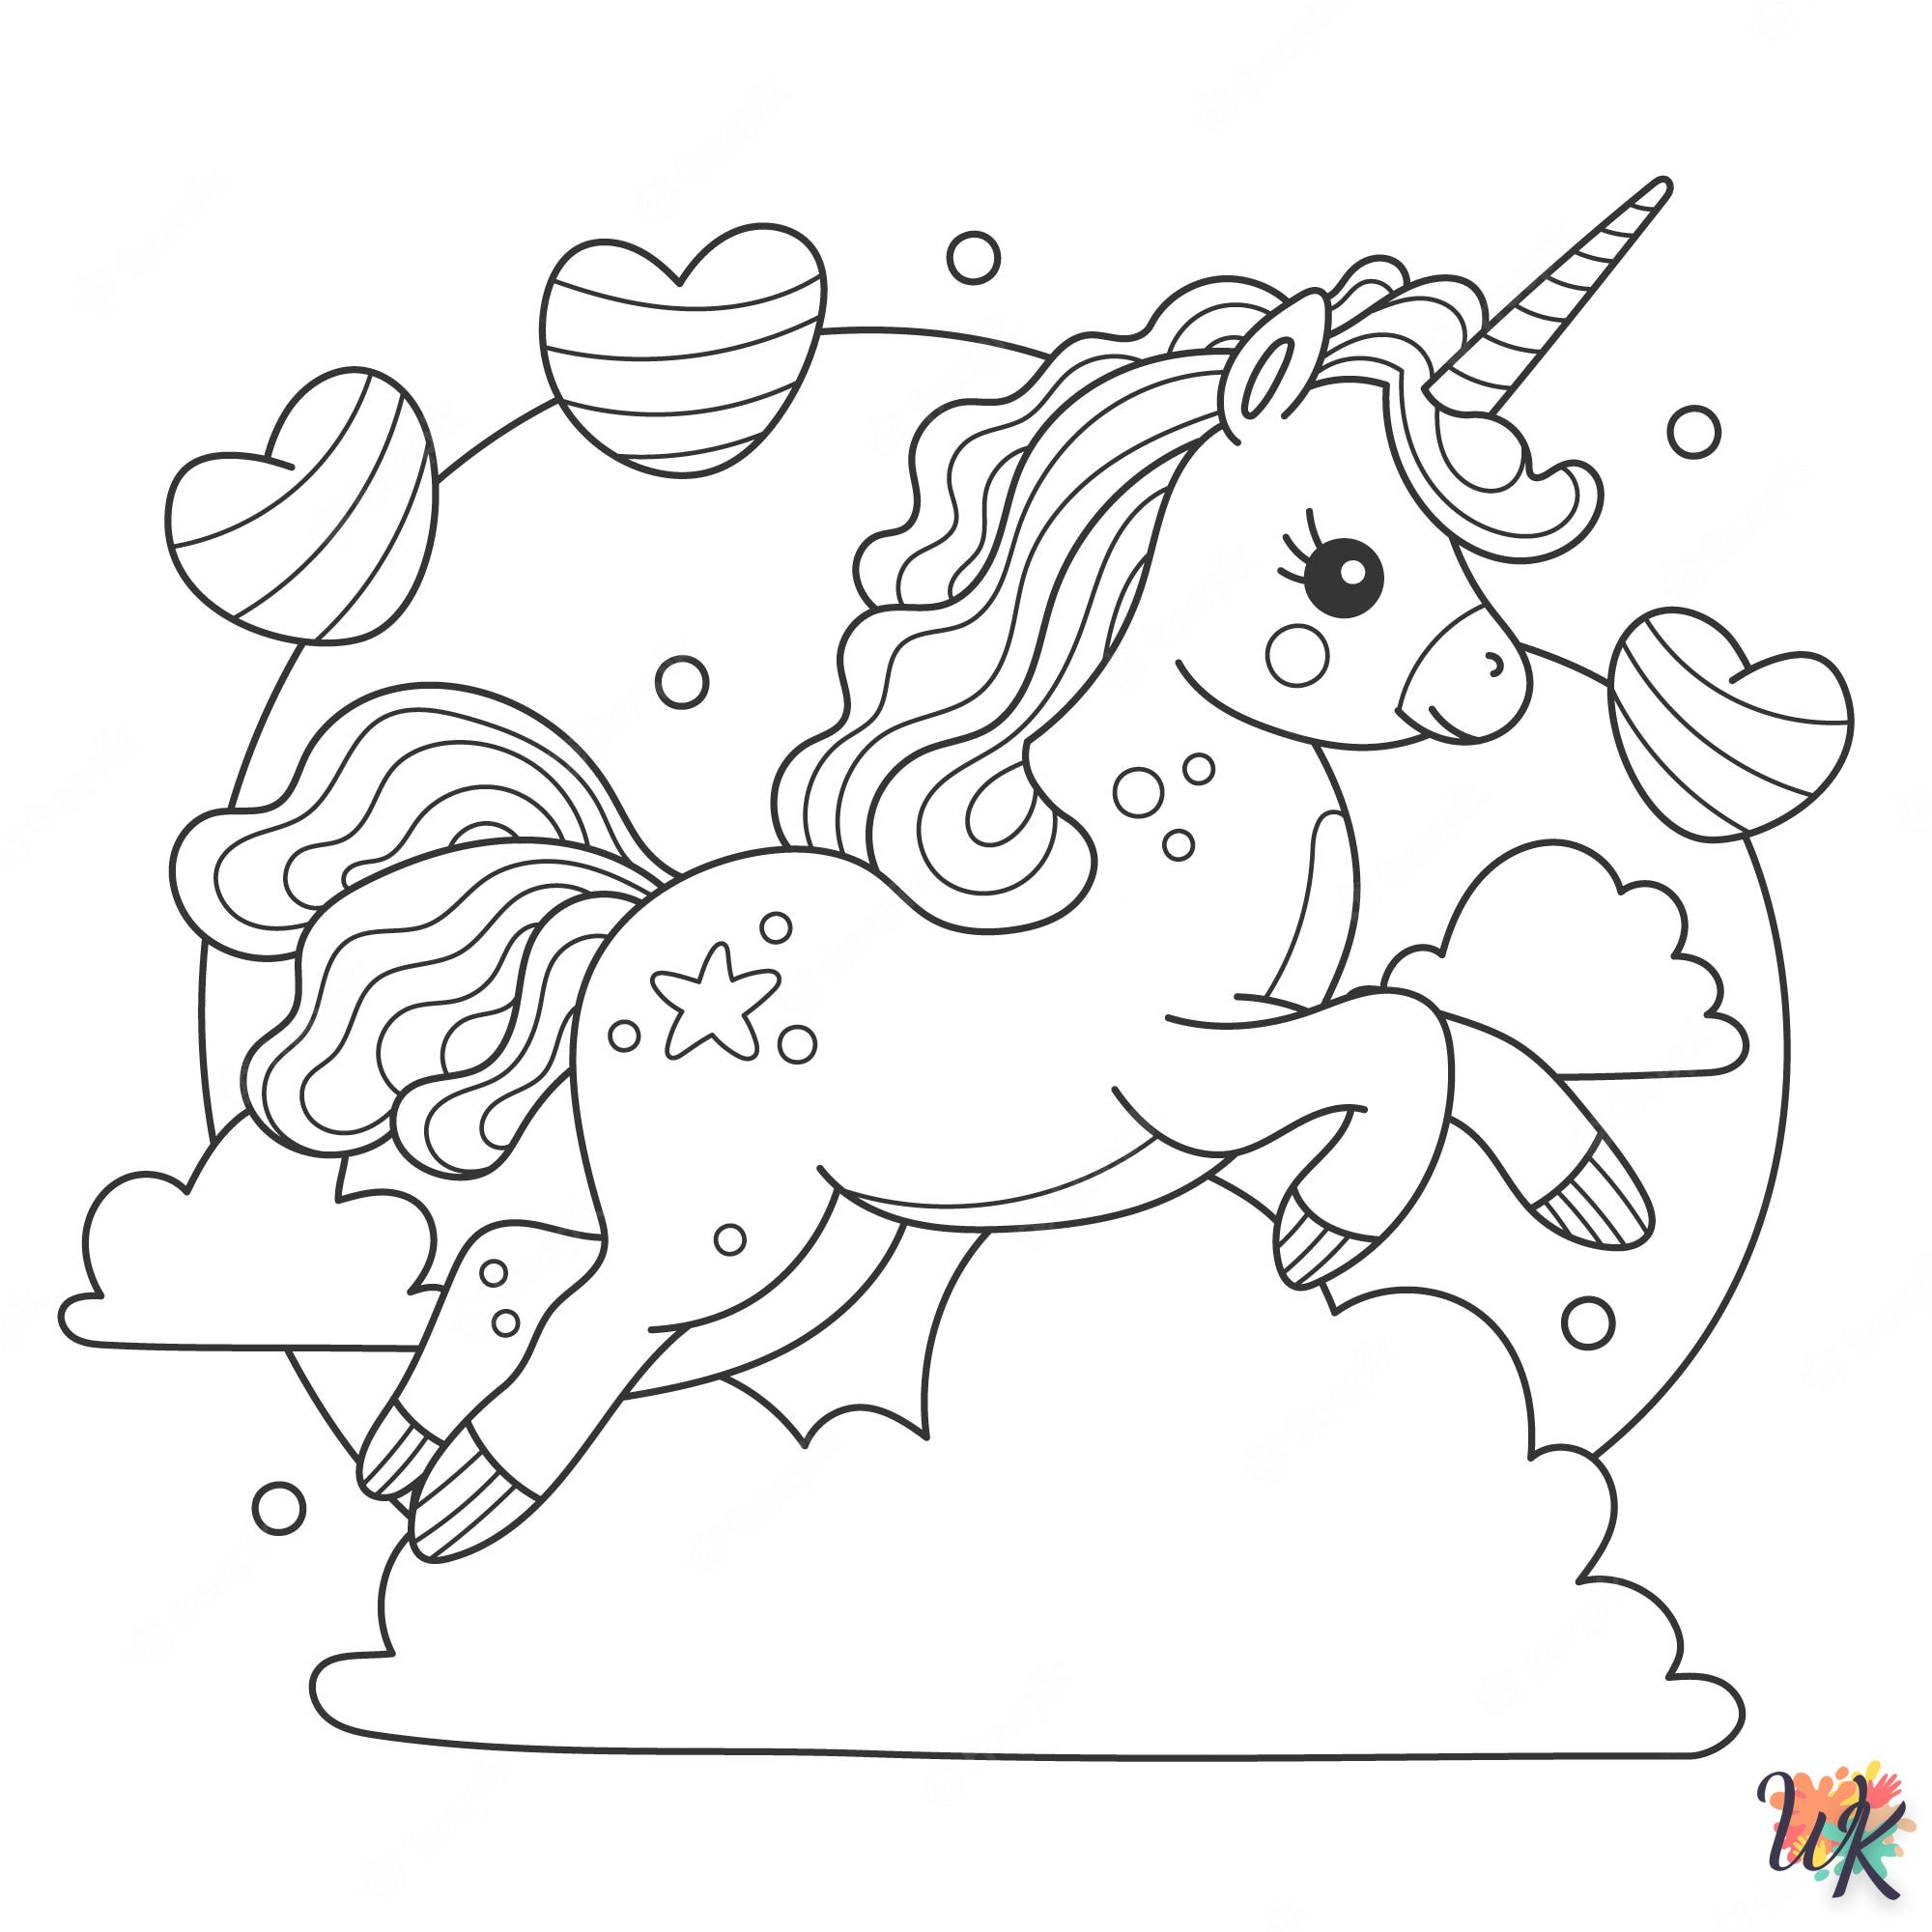 Unicorn coloring pages for adults